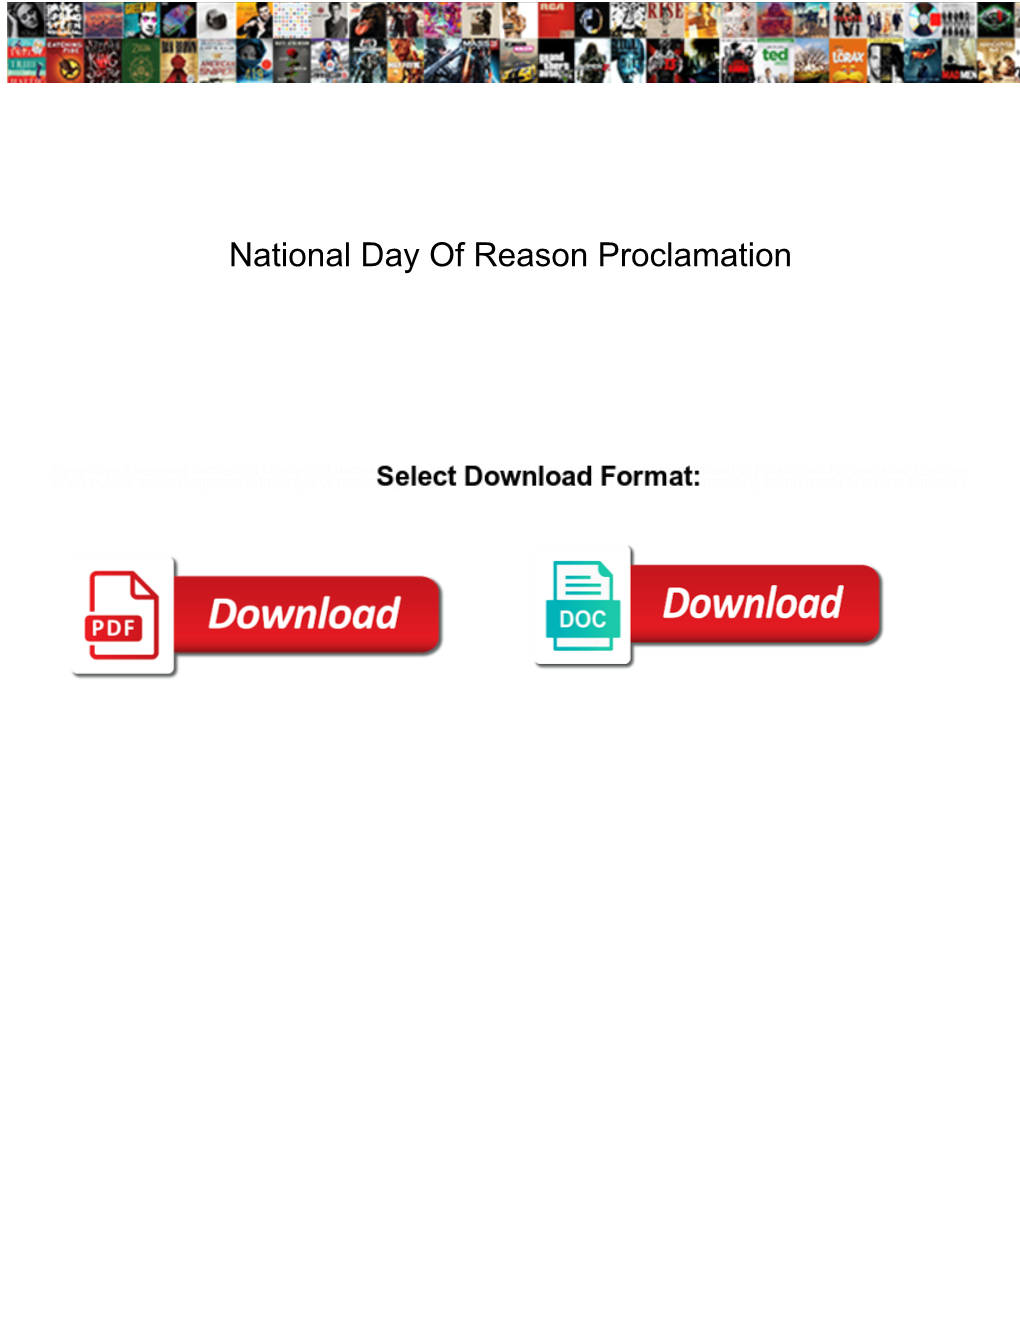 National Day of Reason Proclamation